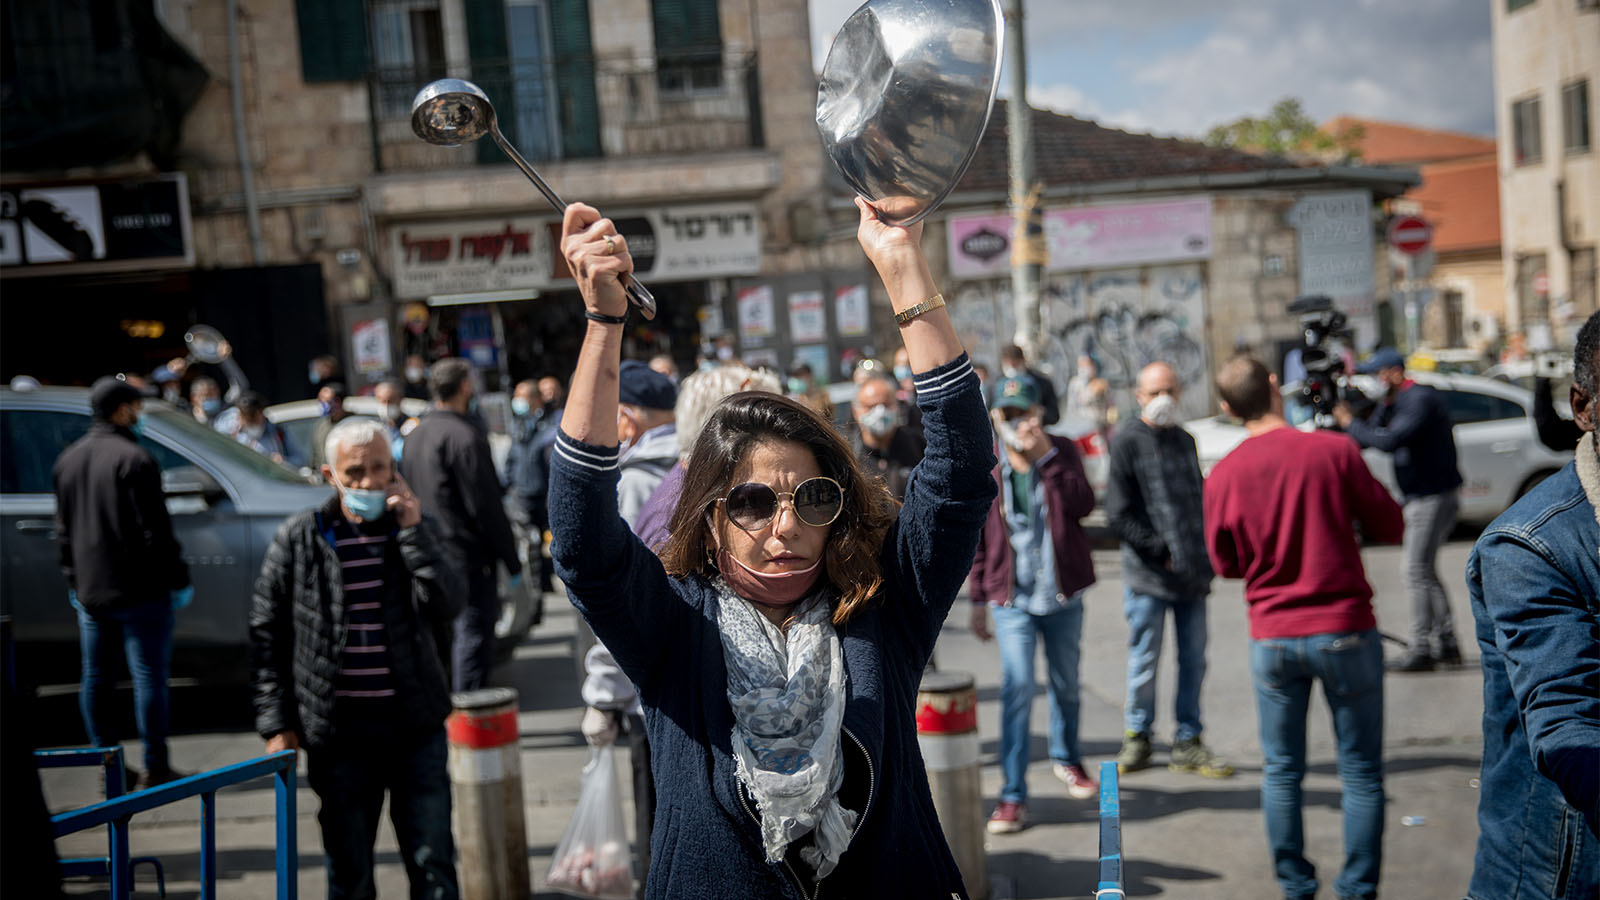 Protestors make their voices heard demanding more aid for the self-employed. (Photograph: Yonatan Zindel/ Flash90)